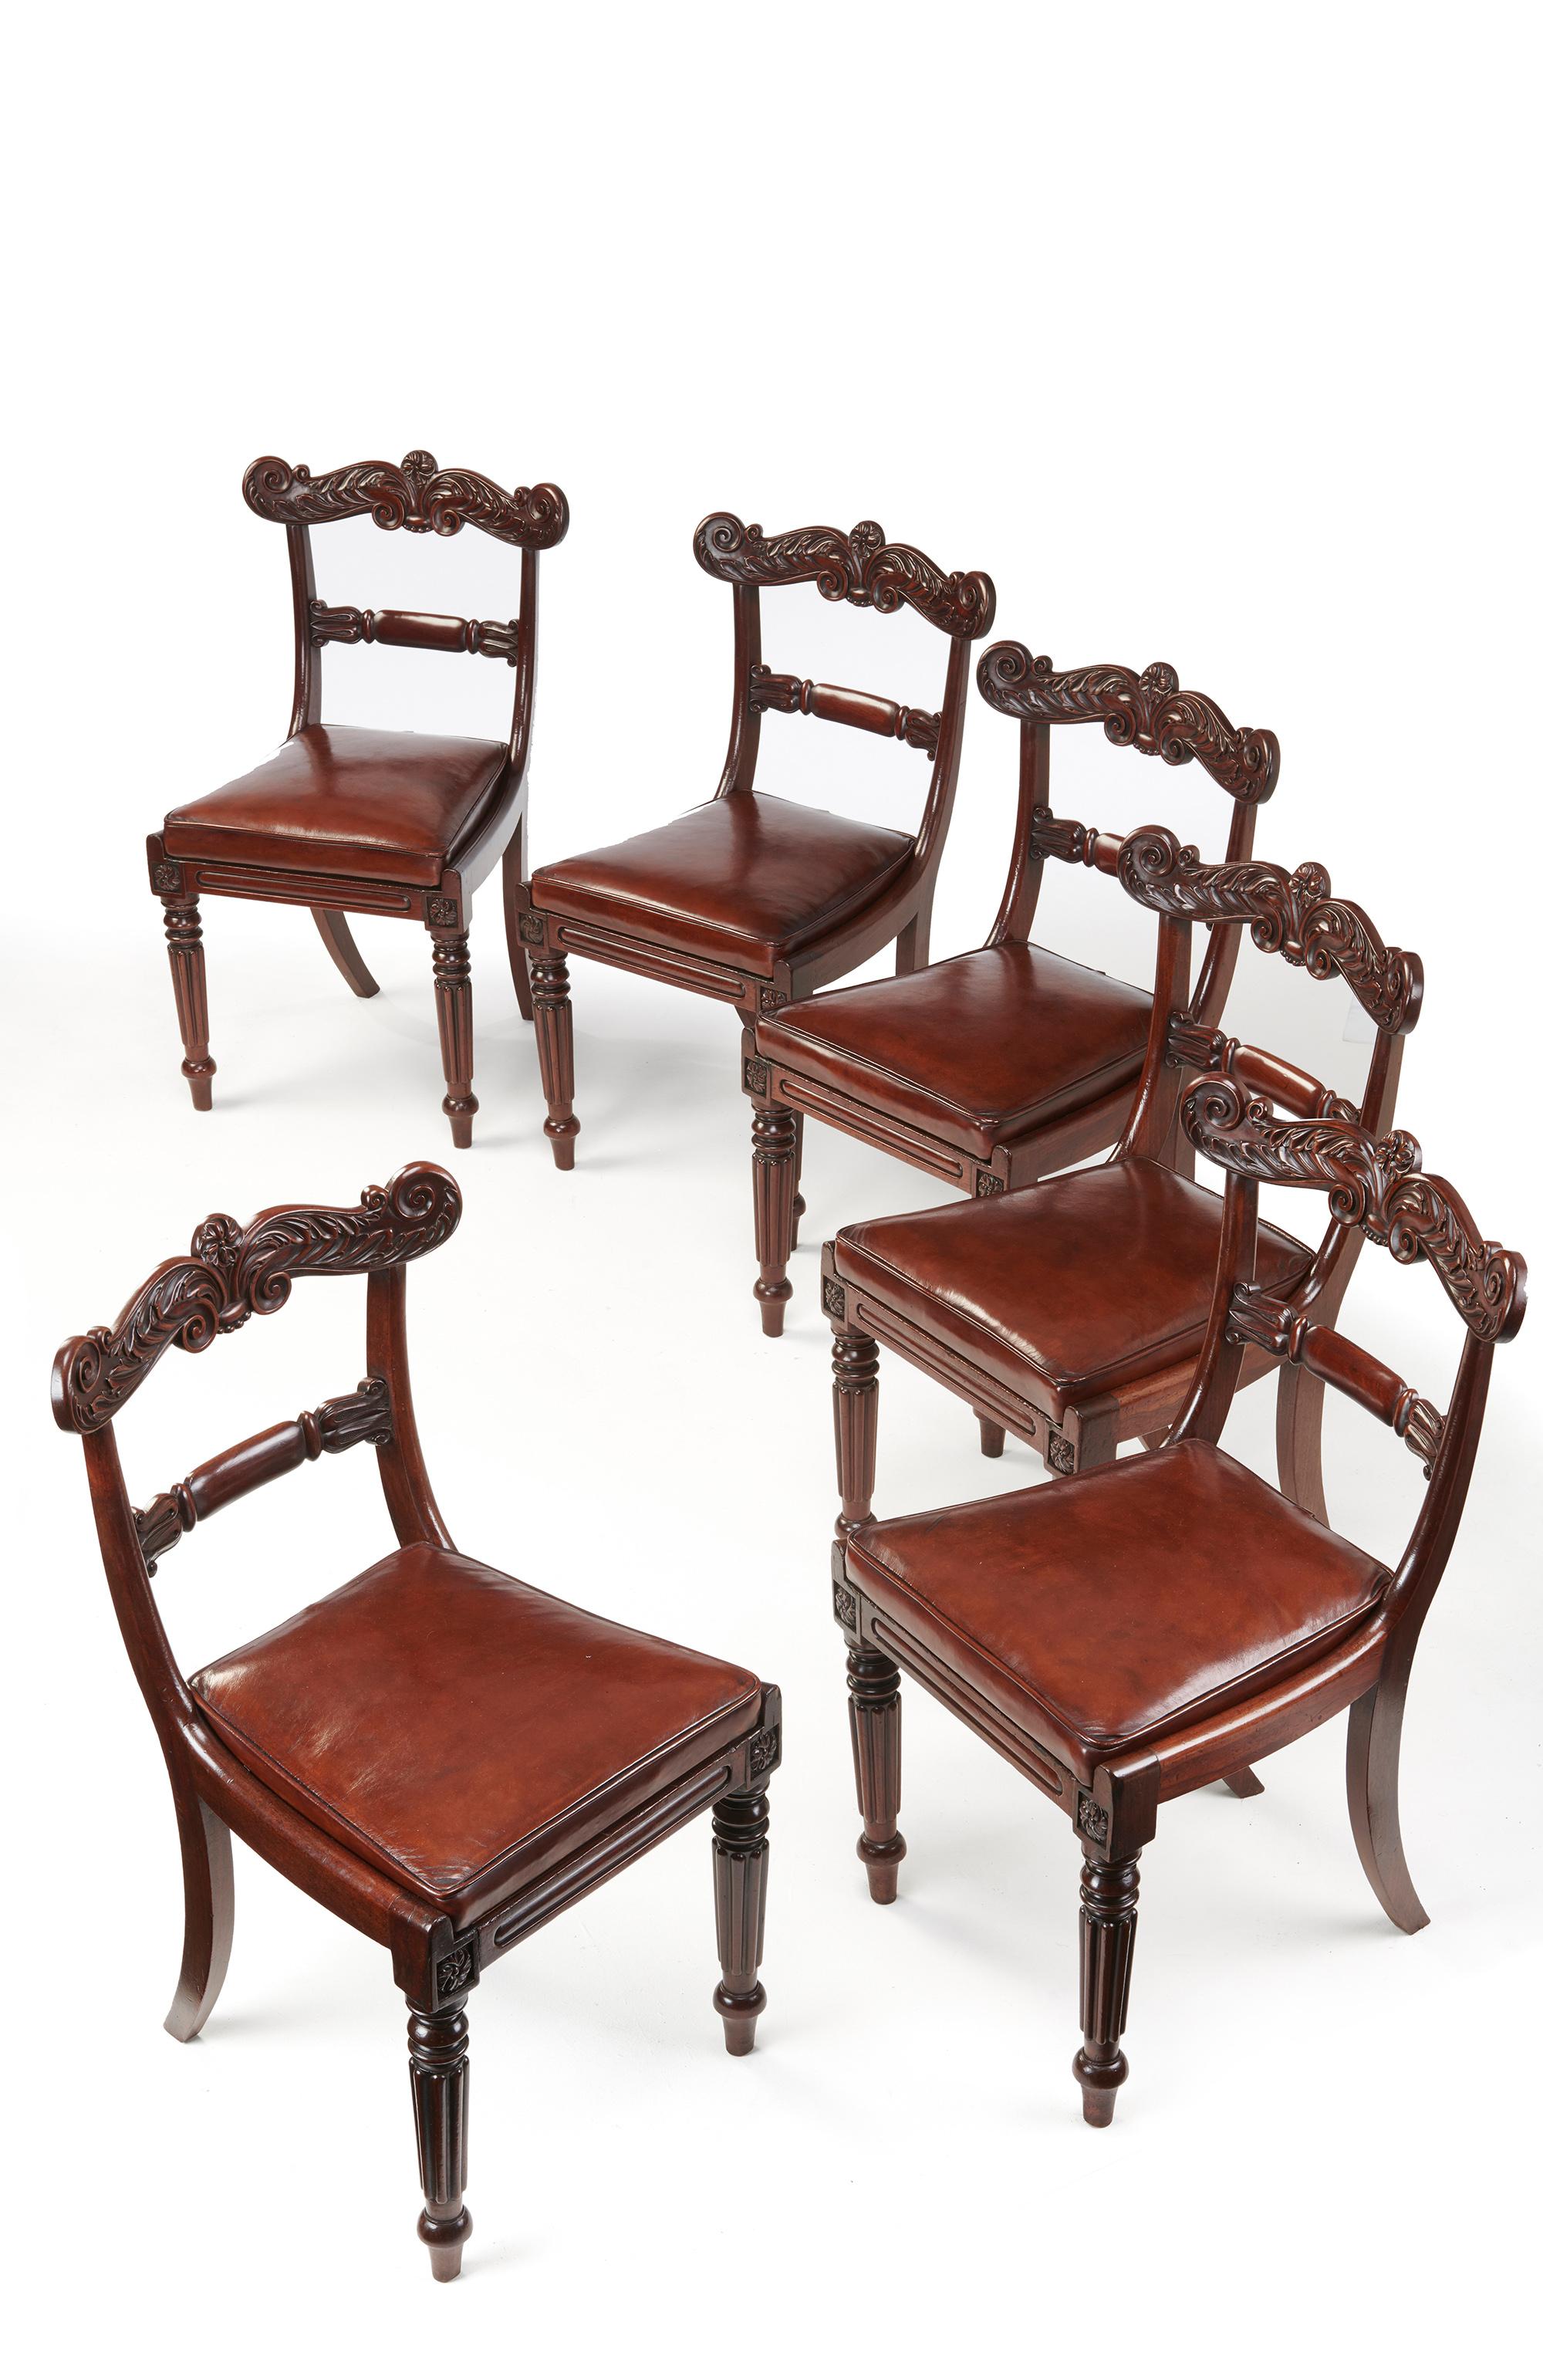 Set of Six William IV Mahogany and Leather Dining Chairs (William IV.)